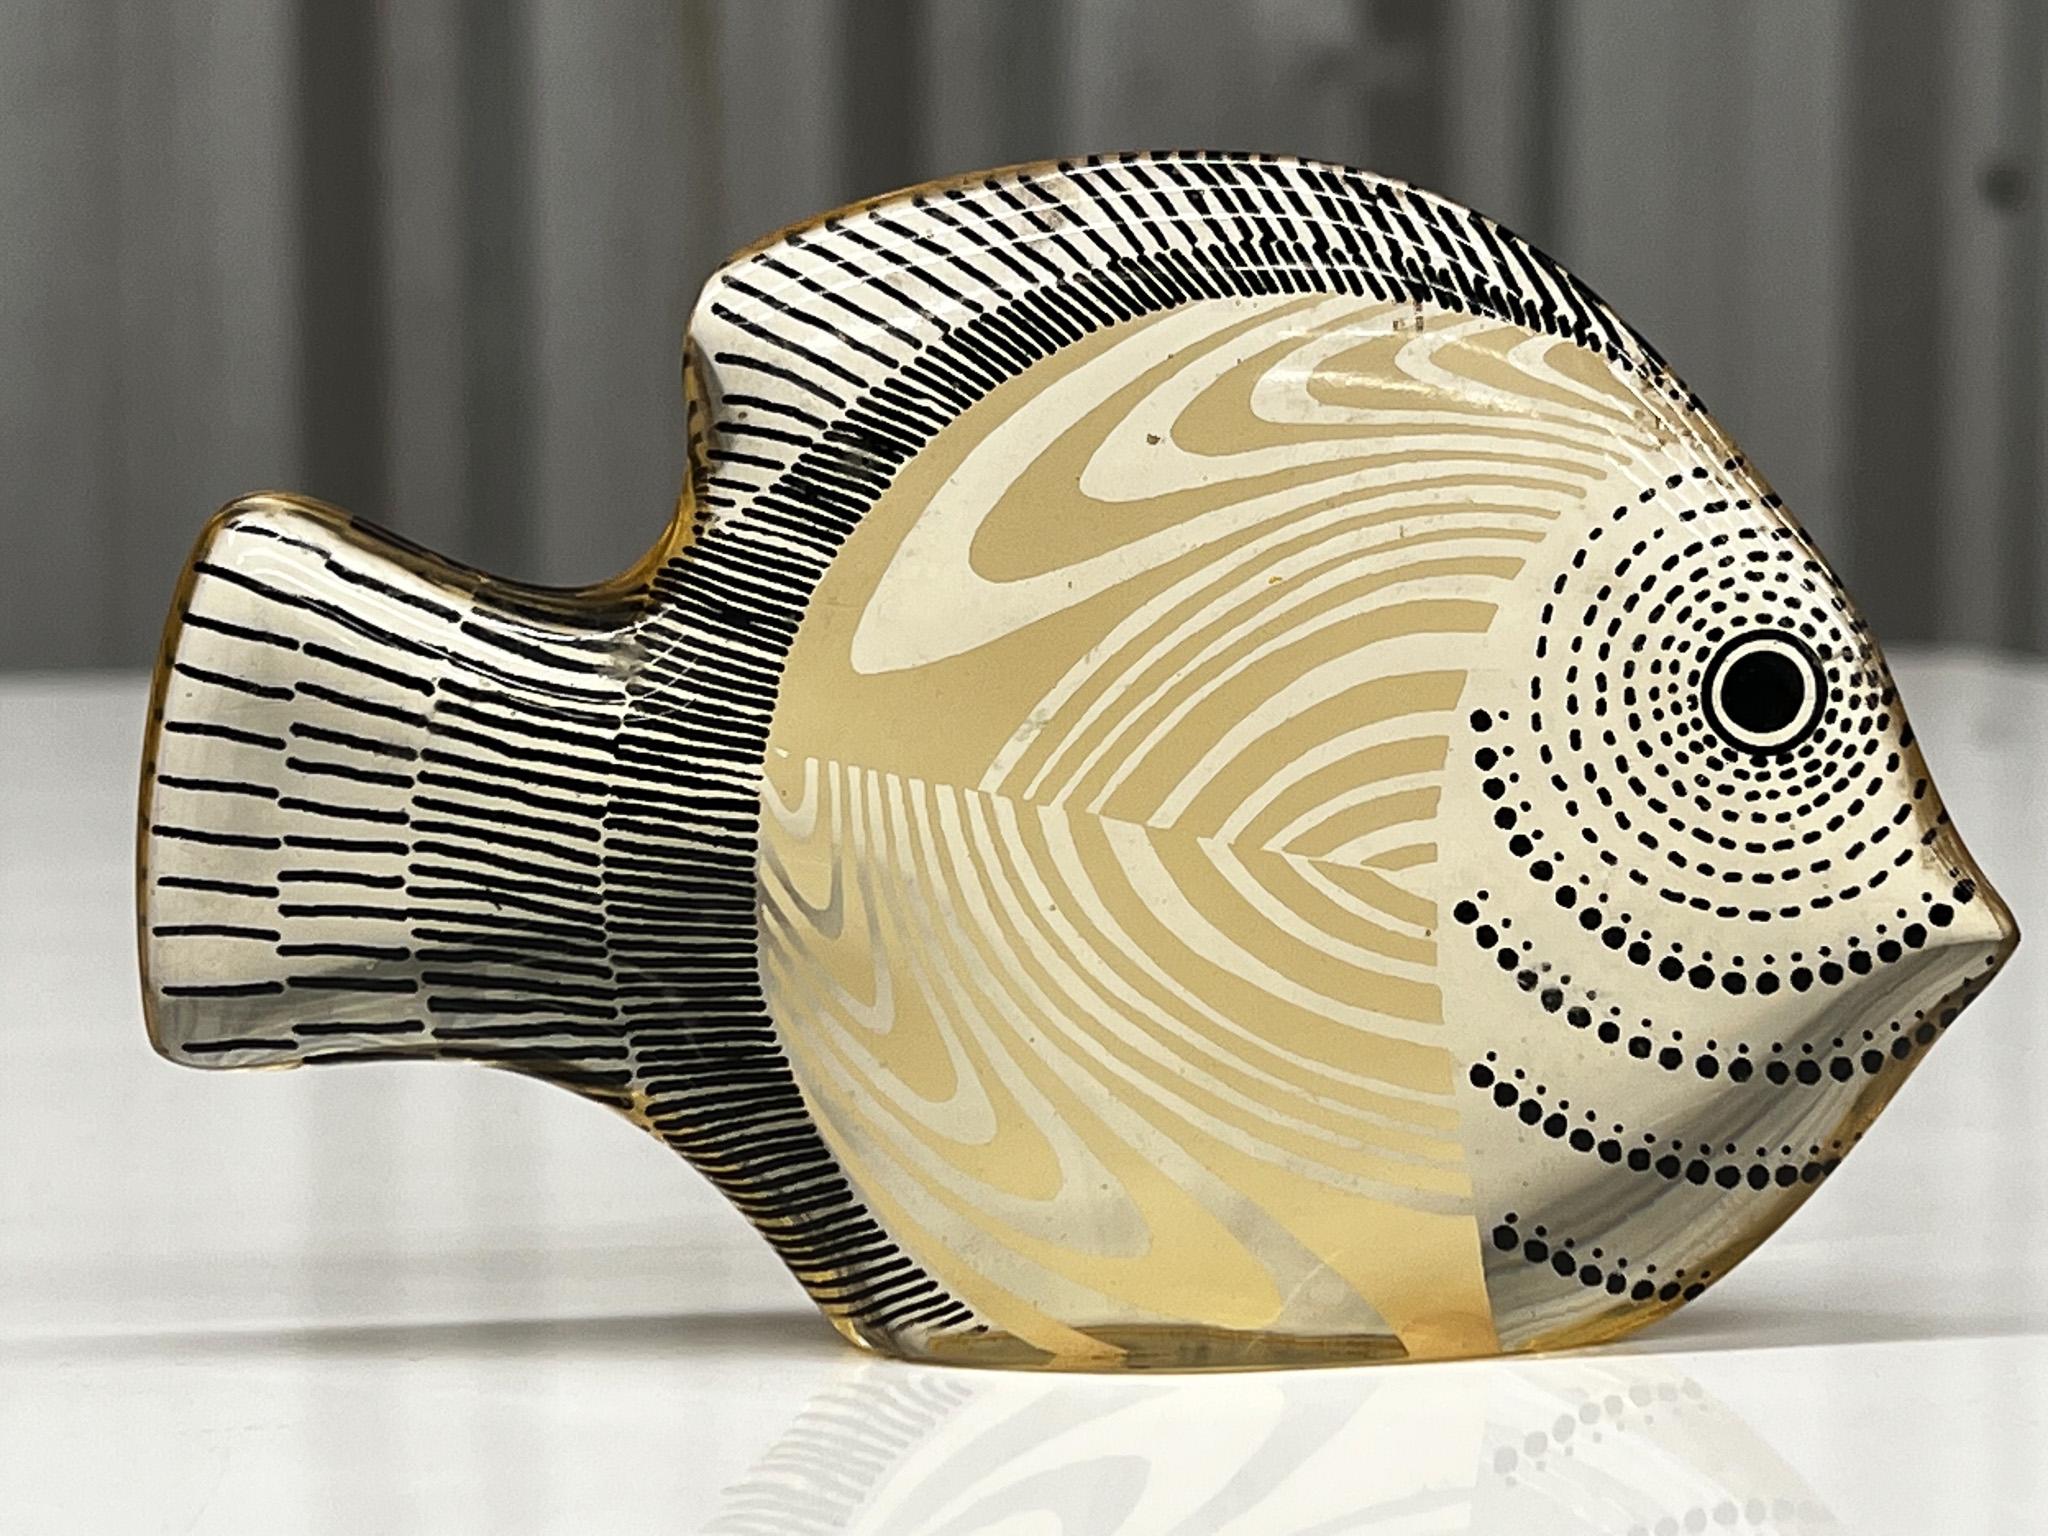 This Brazilian modern sculpture of a fish was designed by Abraham Palatinik in the 1960s. It is part of the Artemis collection that features hundreds of different animals, each with sleek, flat silhouettes. The original manufacturing label can be